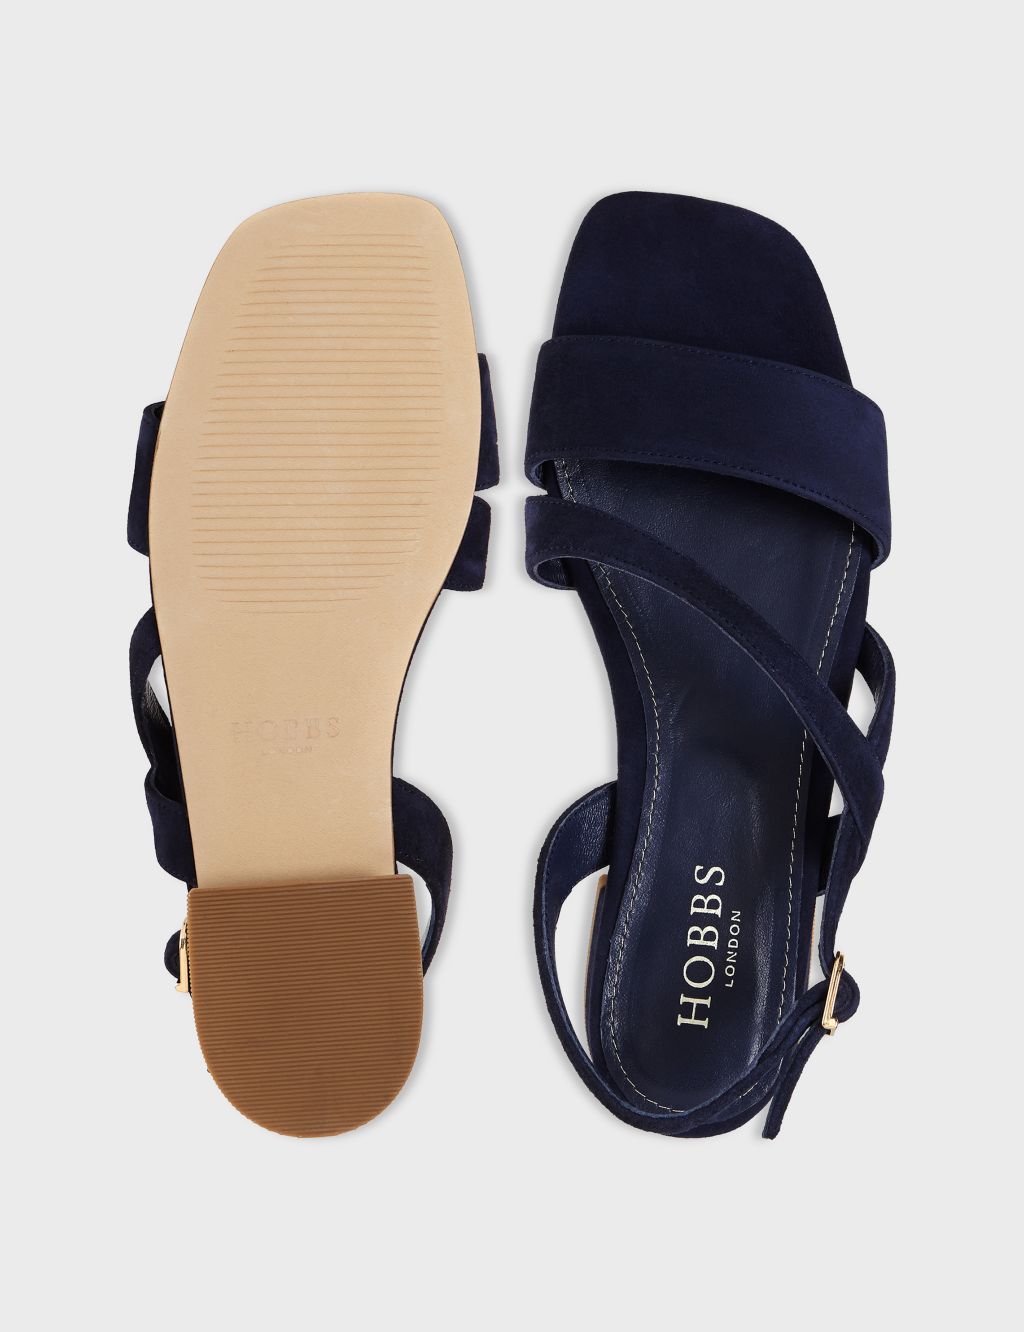 Suede Buckle Square Toe Sandals image 3